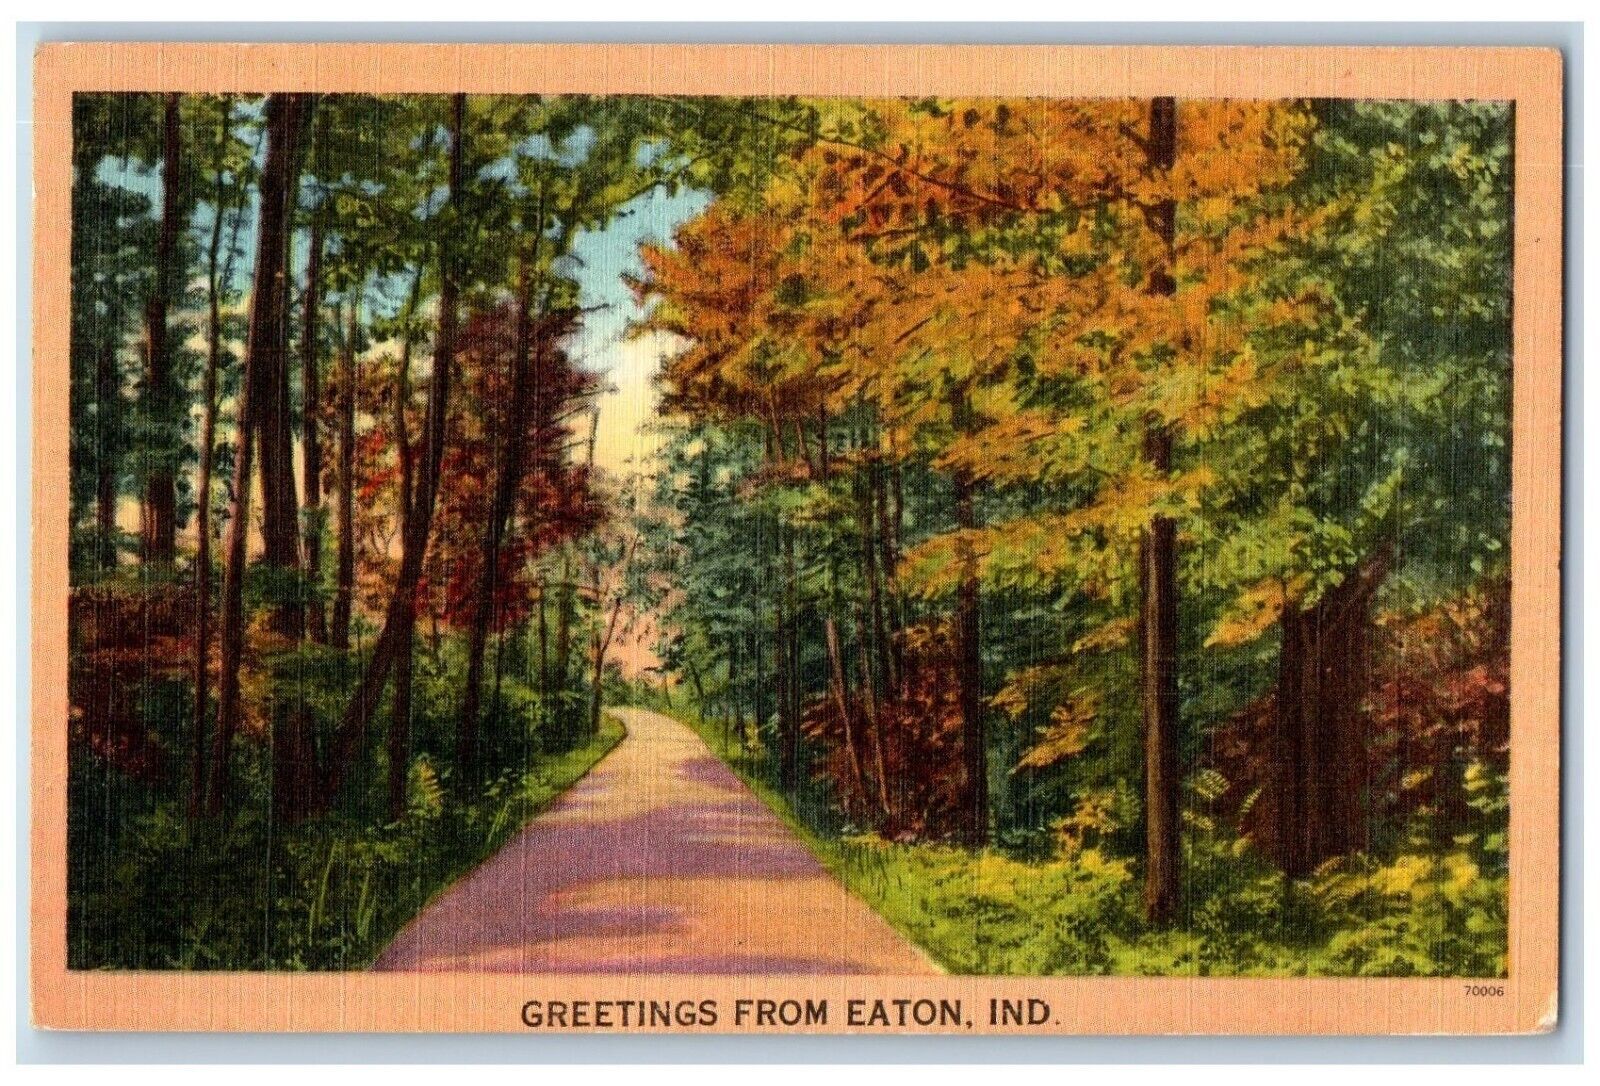 Eaton Indiana IN Postcard Greetings View Of Curve Road And Trees 1950 Vintage